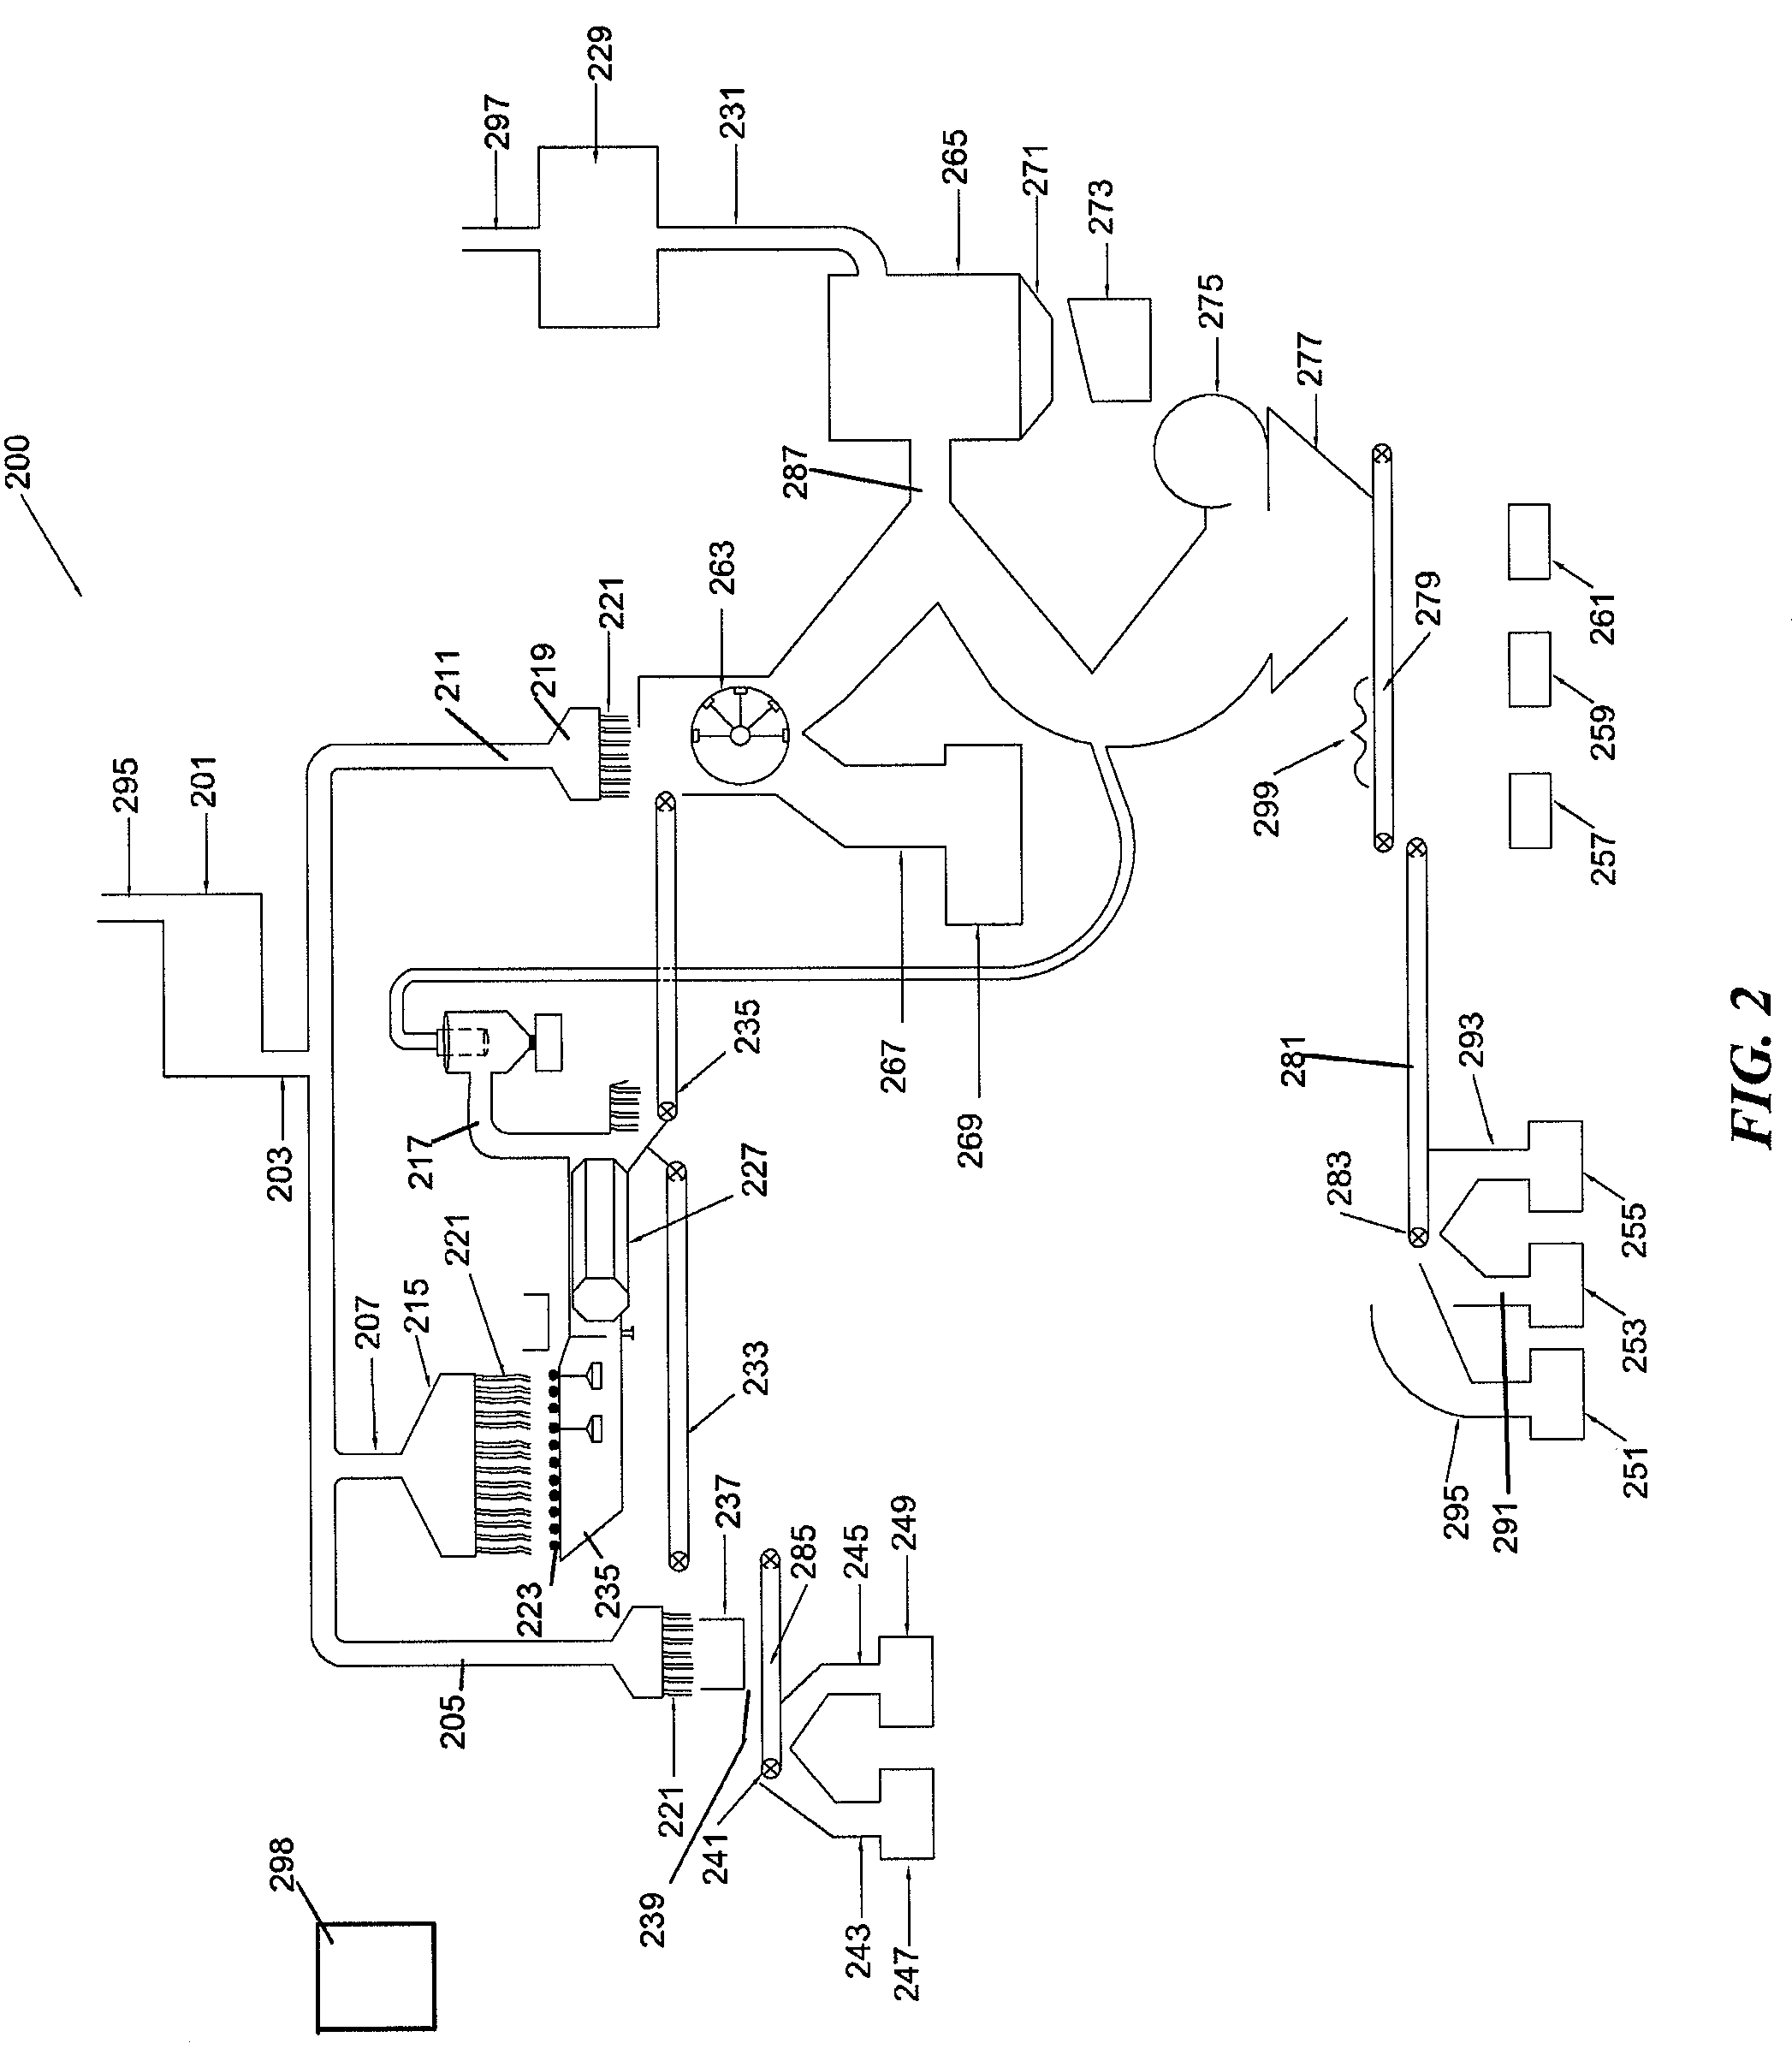 Systems and methods for recovering materials from soil